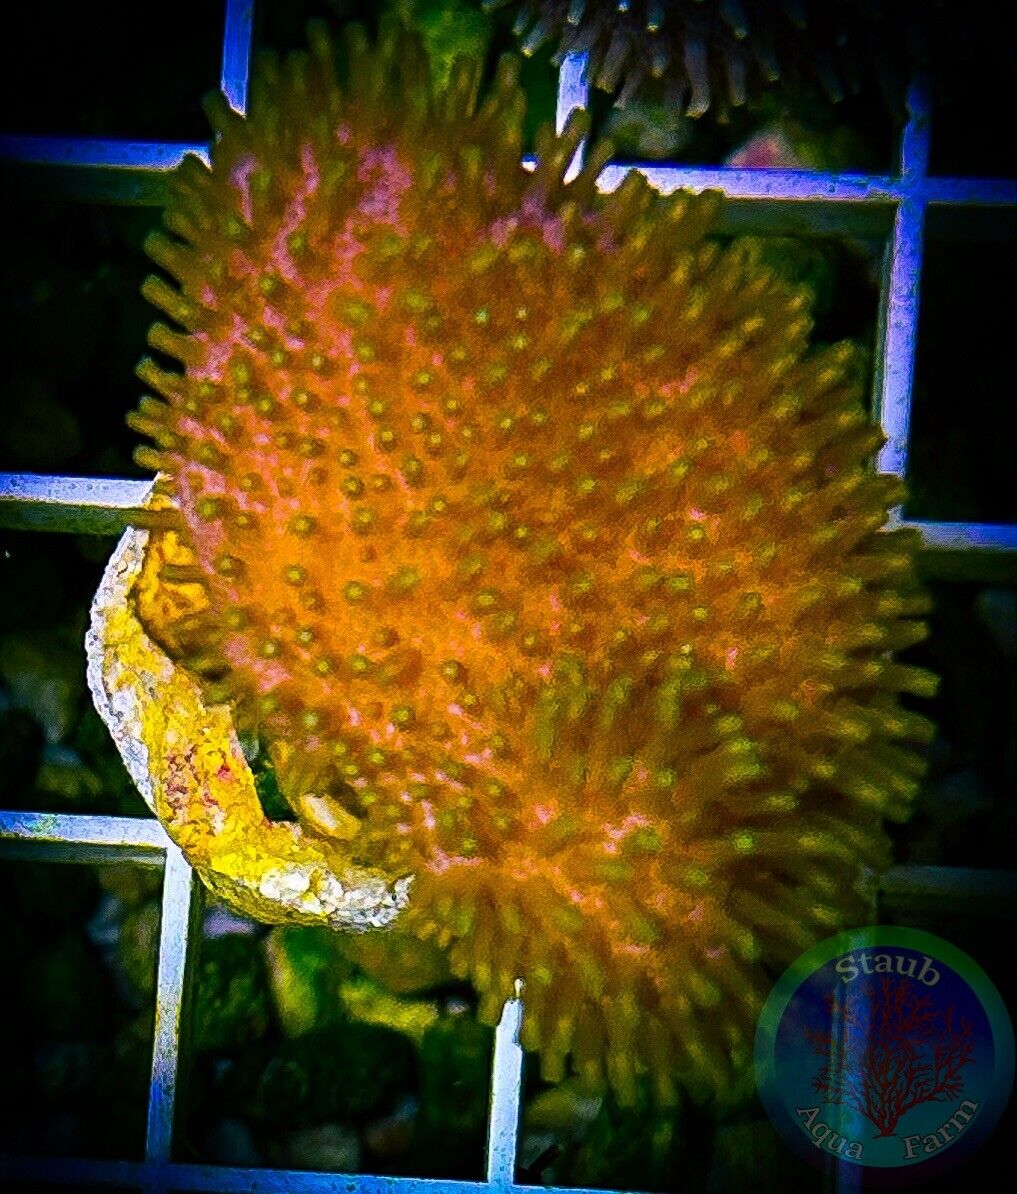 SAF~ Toadstool Leather Coral Frag,  “WYSIWYG” Soft, Coral Colony, SPS, LPS